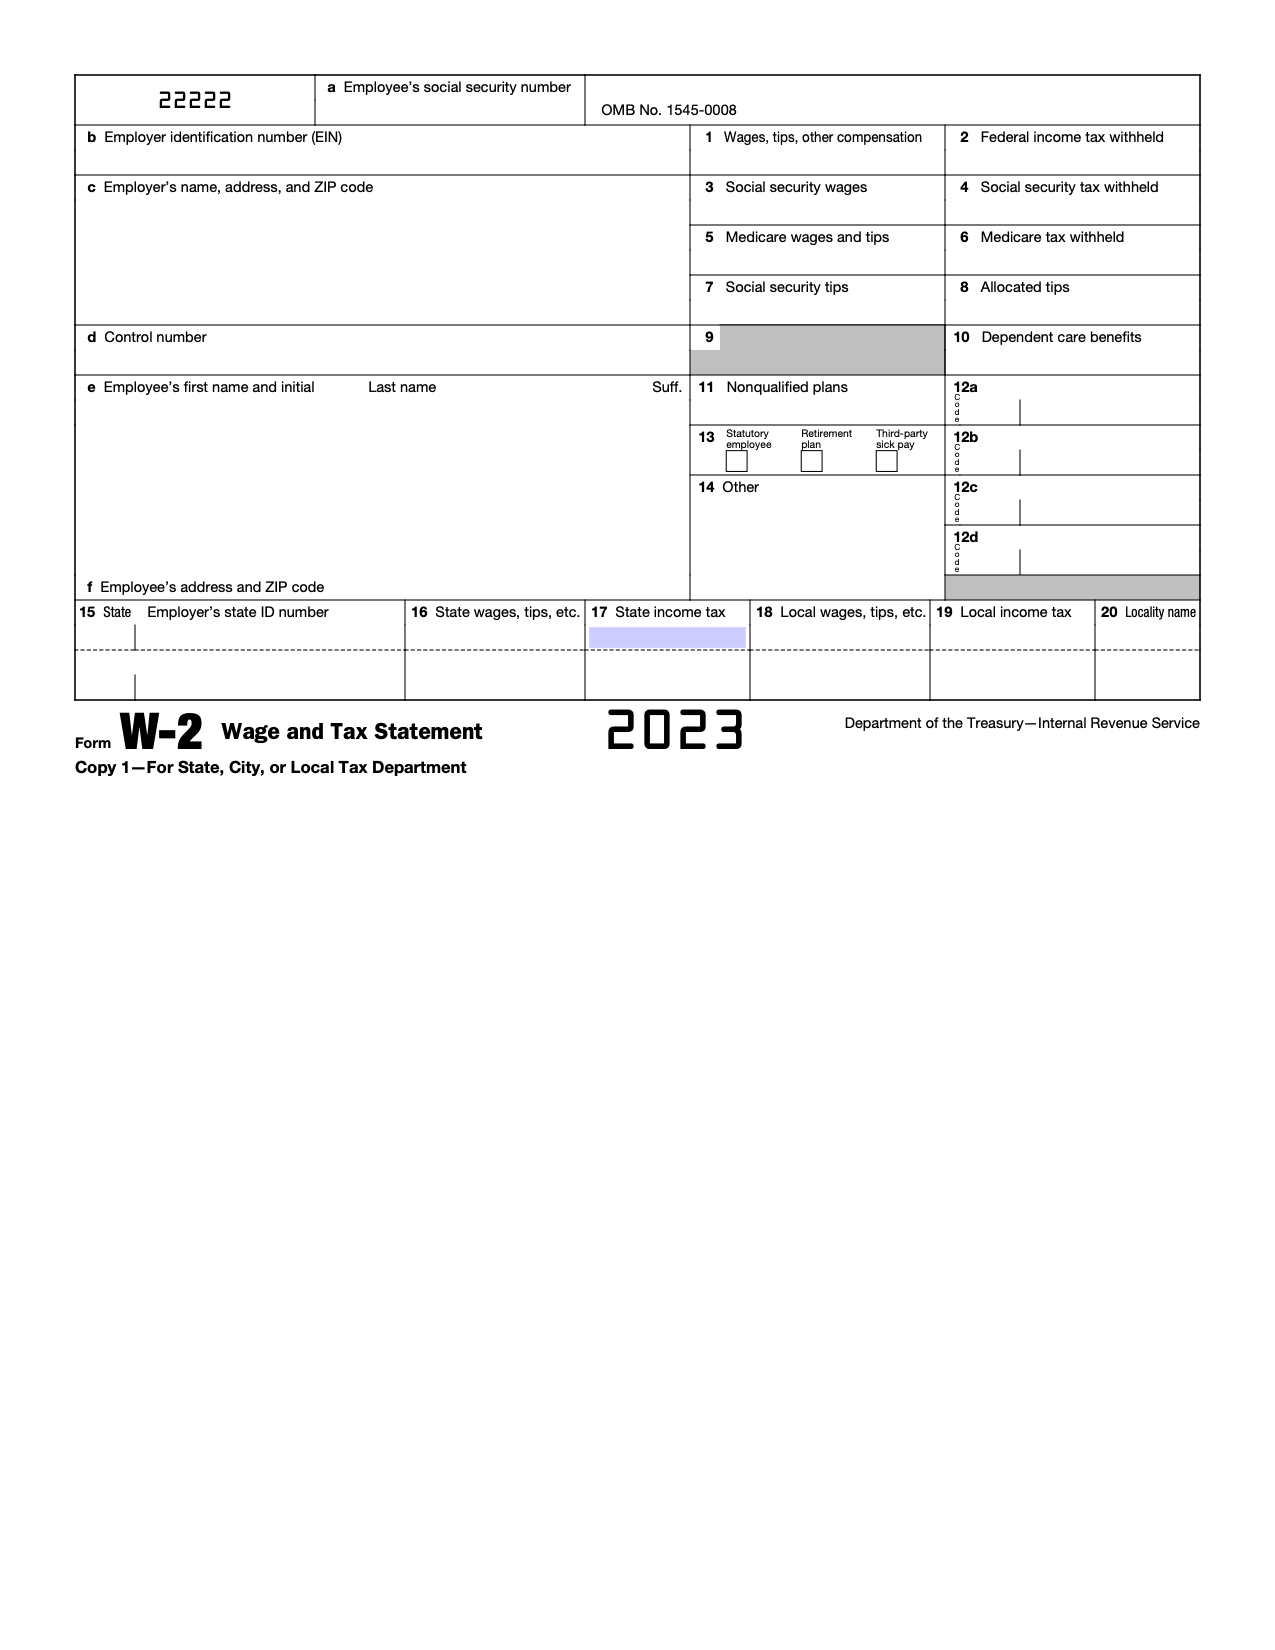 Free Irs Form W-2 | Wage And Tax Statement - Pdf – Eforms intended for W2 Printable Form 2023